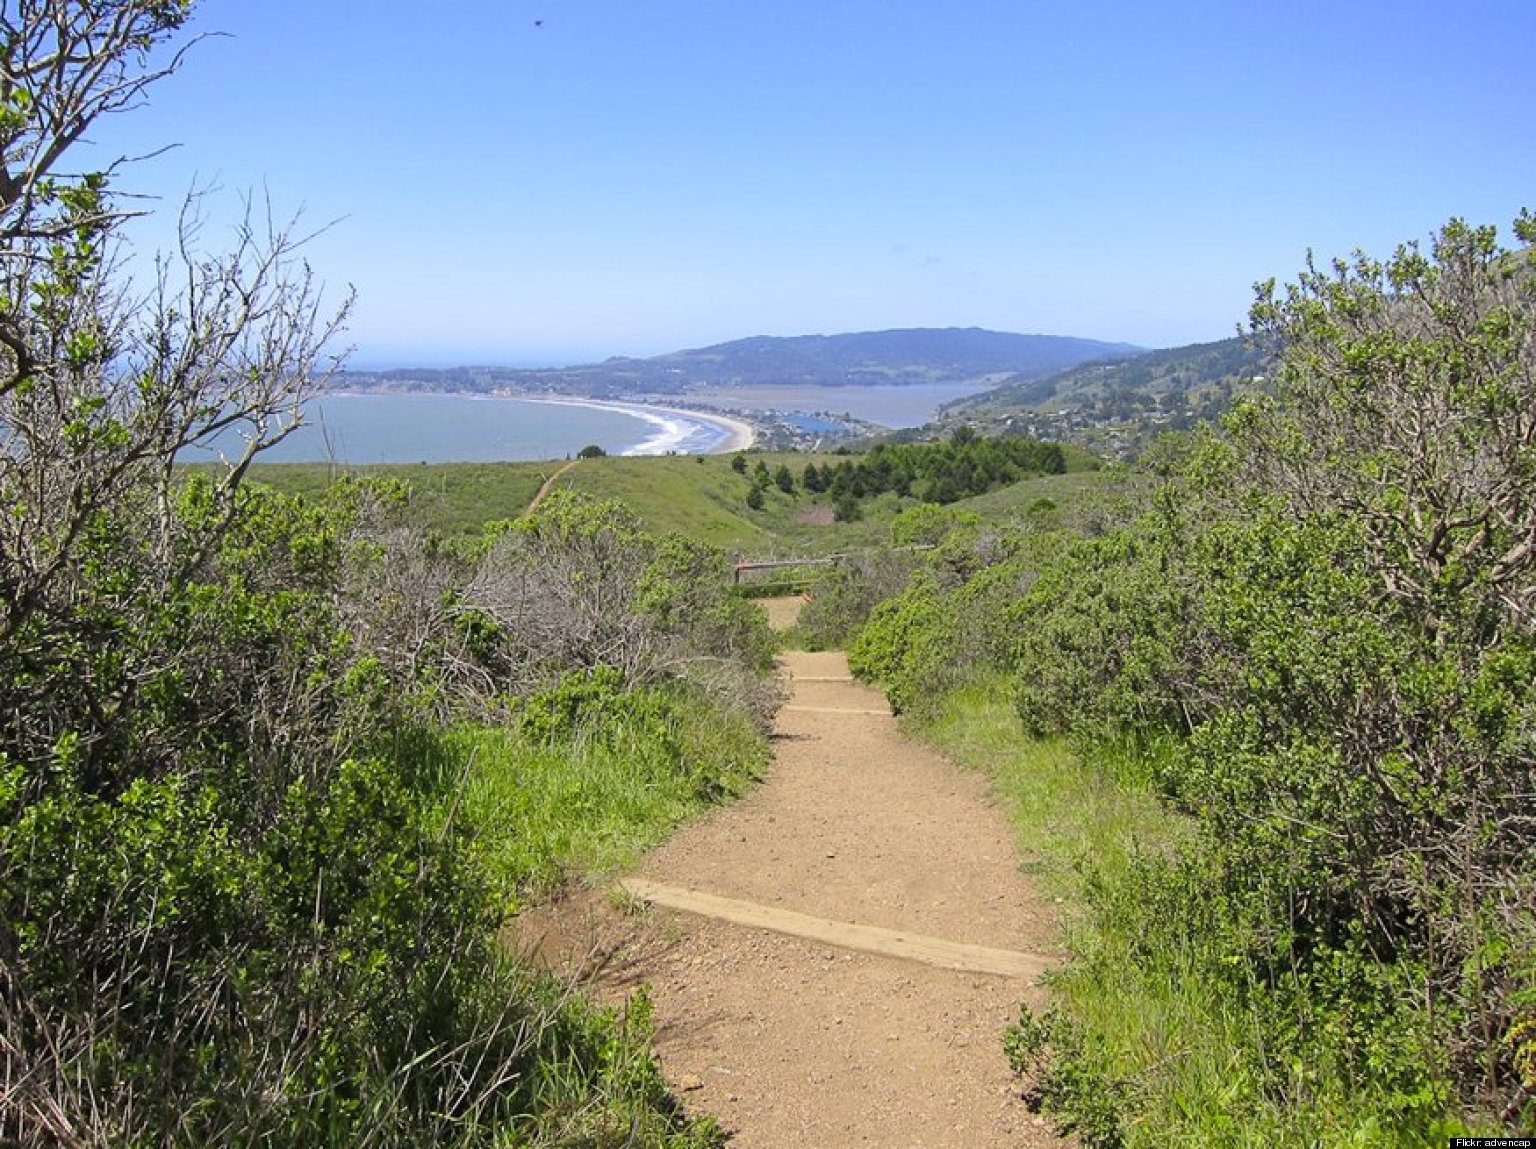 Best US Coastal Hikes: Escape The City Hiking 10 Of America's Best